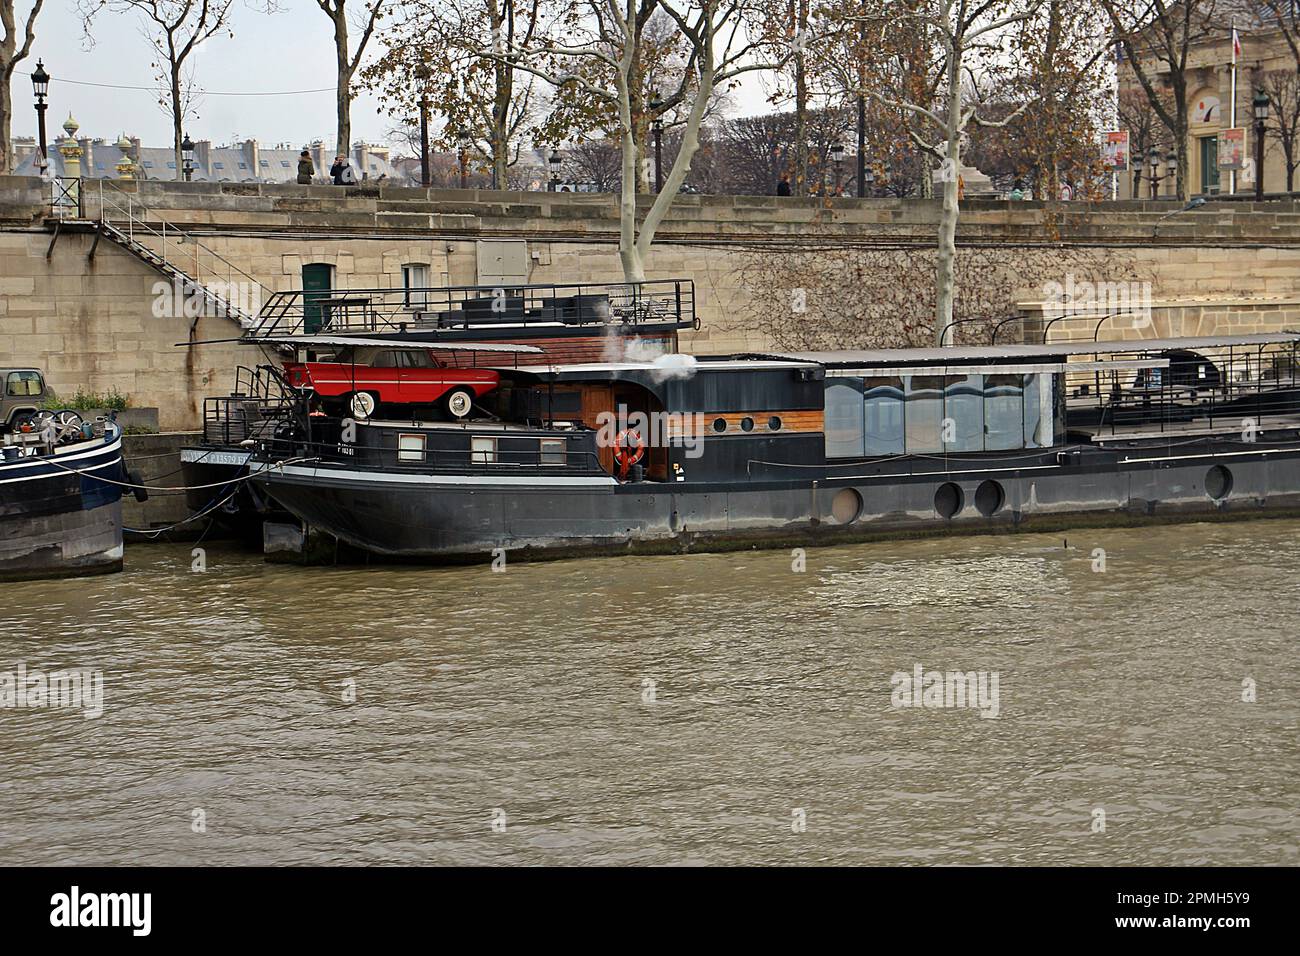 PARIS, FRANCE - DECEMBER 2, 2017  a barge moored on the banks of the River Seine Stock Photo